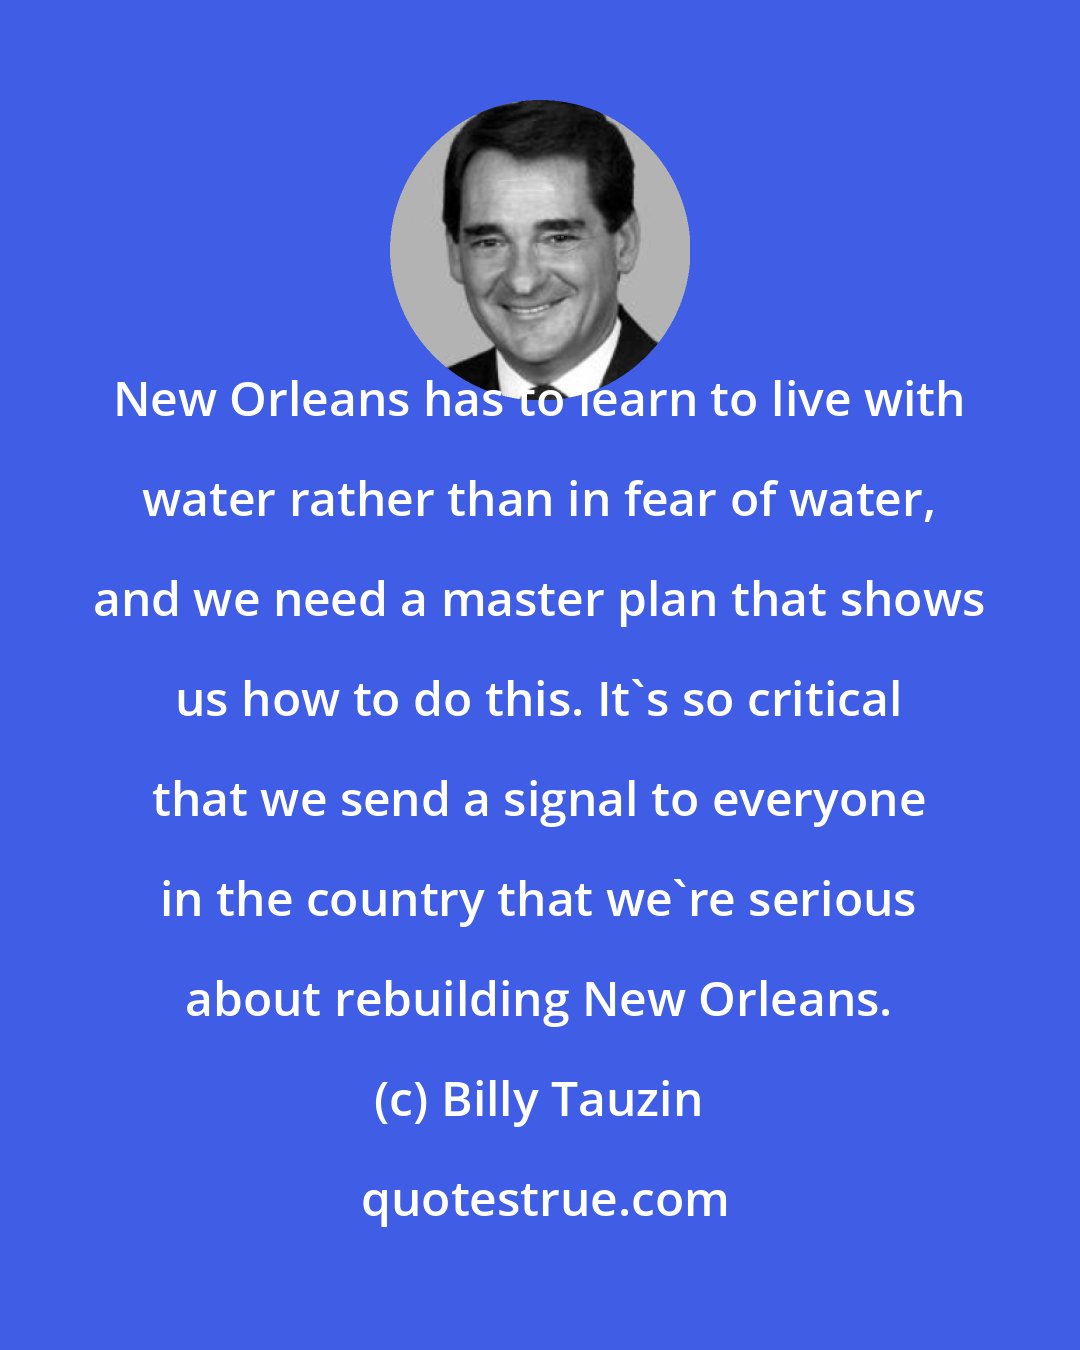 Billy Tauzin: New Orleans has to learn to live with water rather than in fear of water, and we need a master plan that shows us how to do this. It's so critical that we send a signal to everyone in the country that we're serious about rebuilding New Orleans.